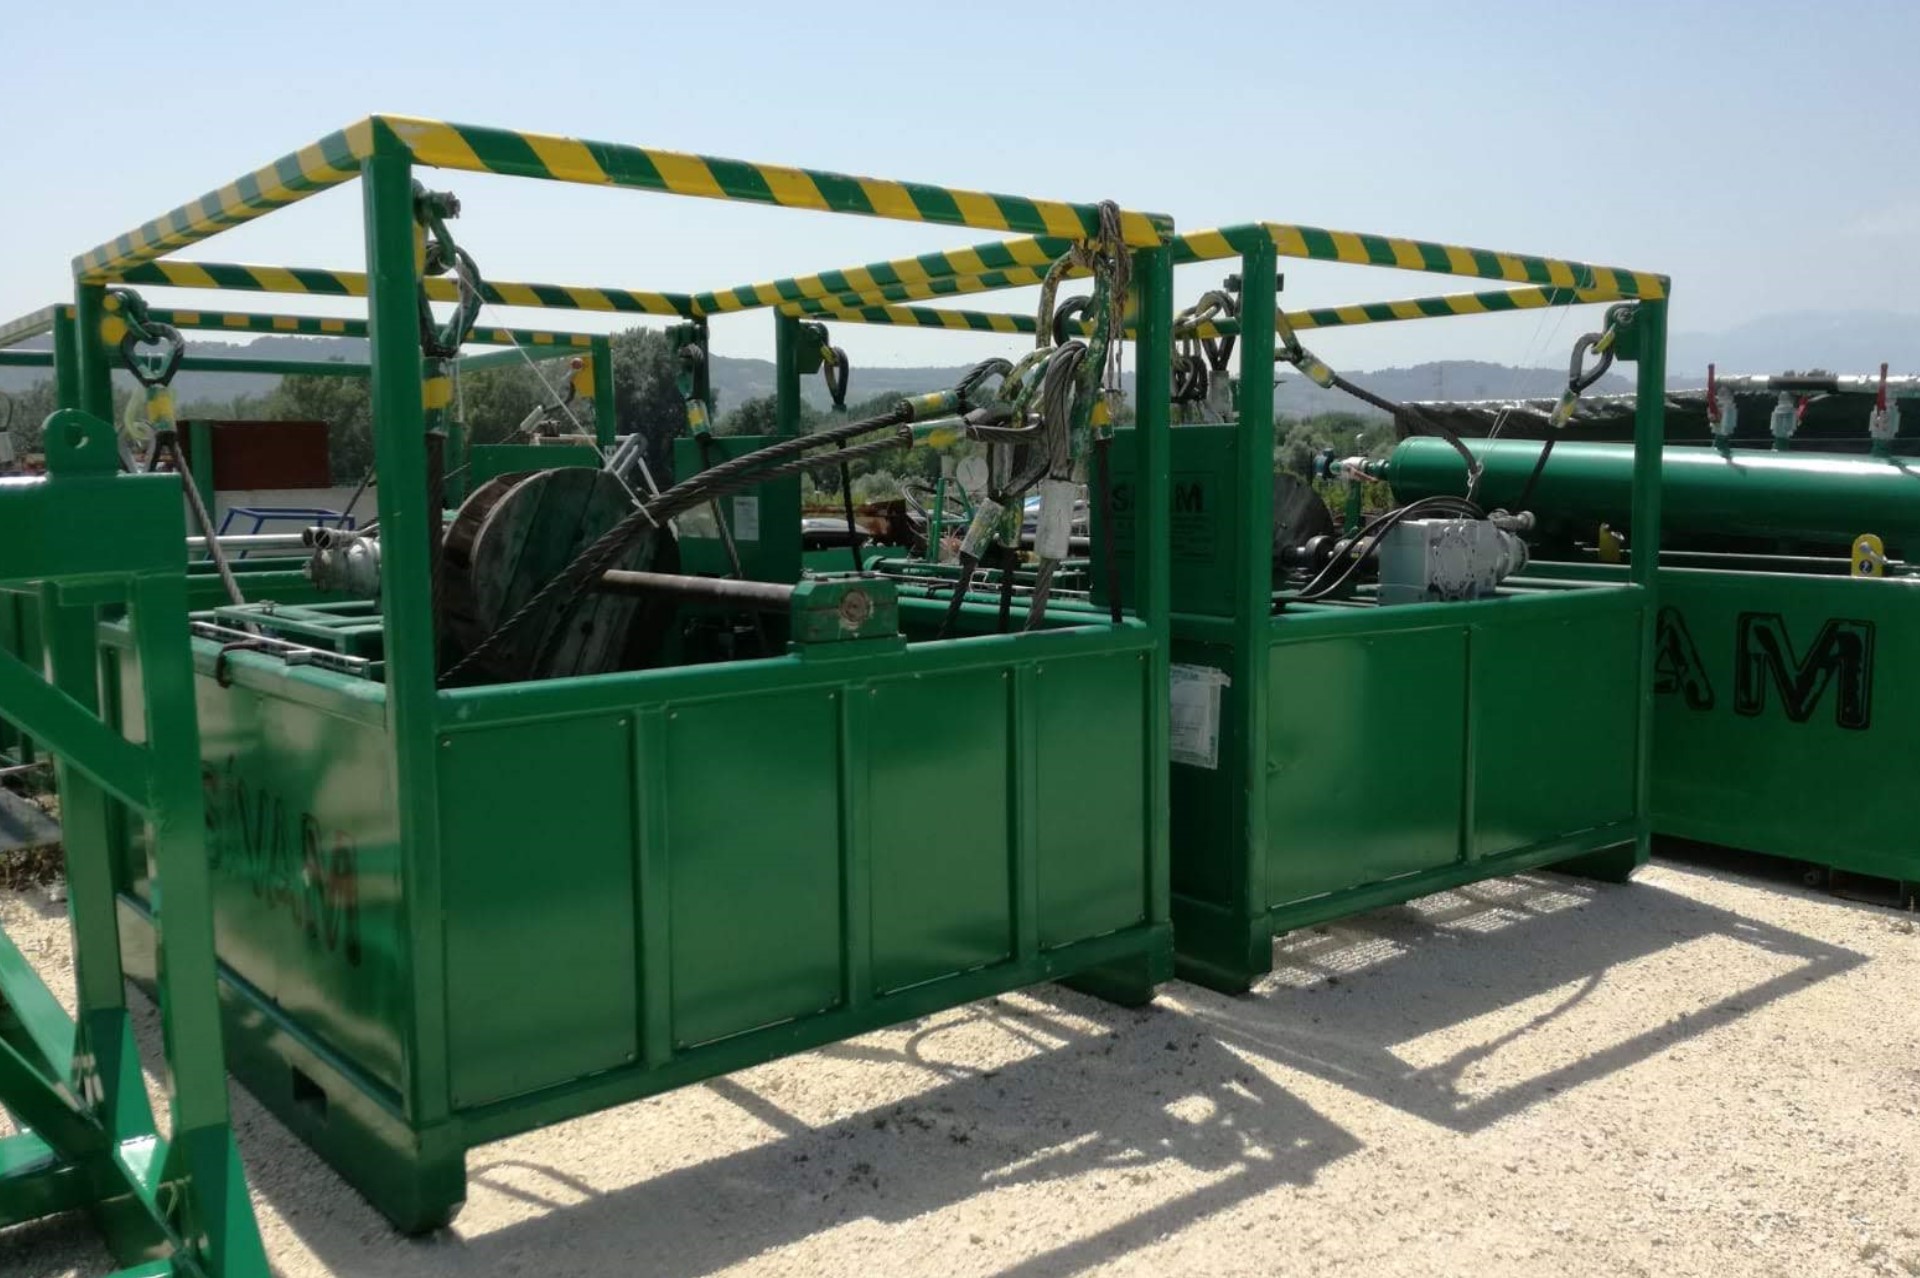 Oil and Gas Rental Equipment